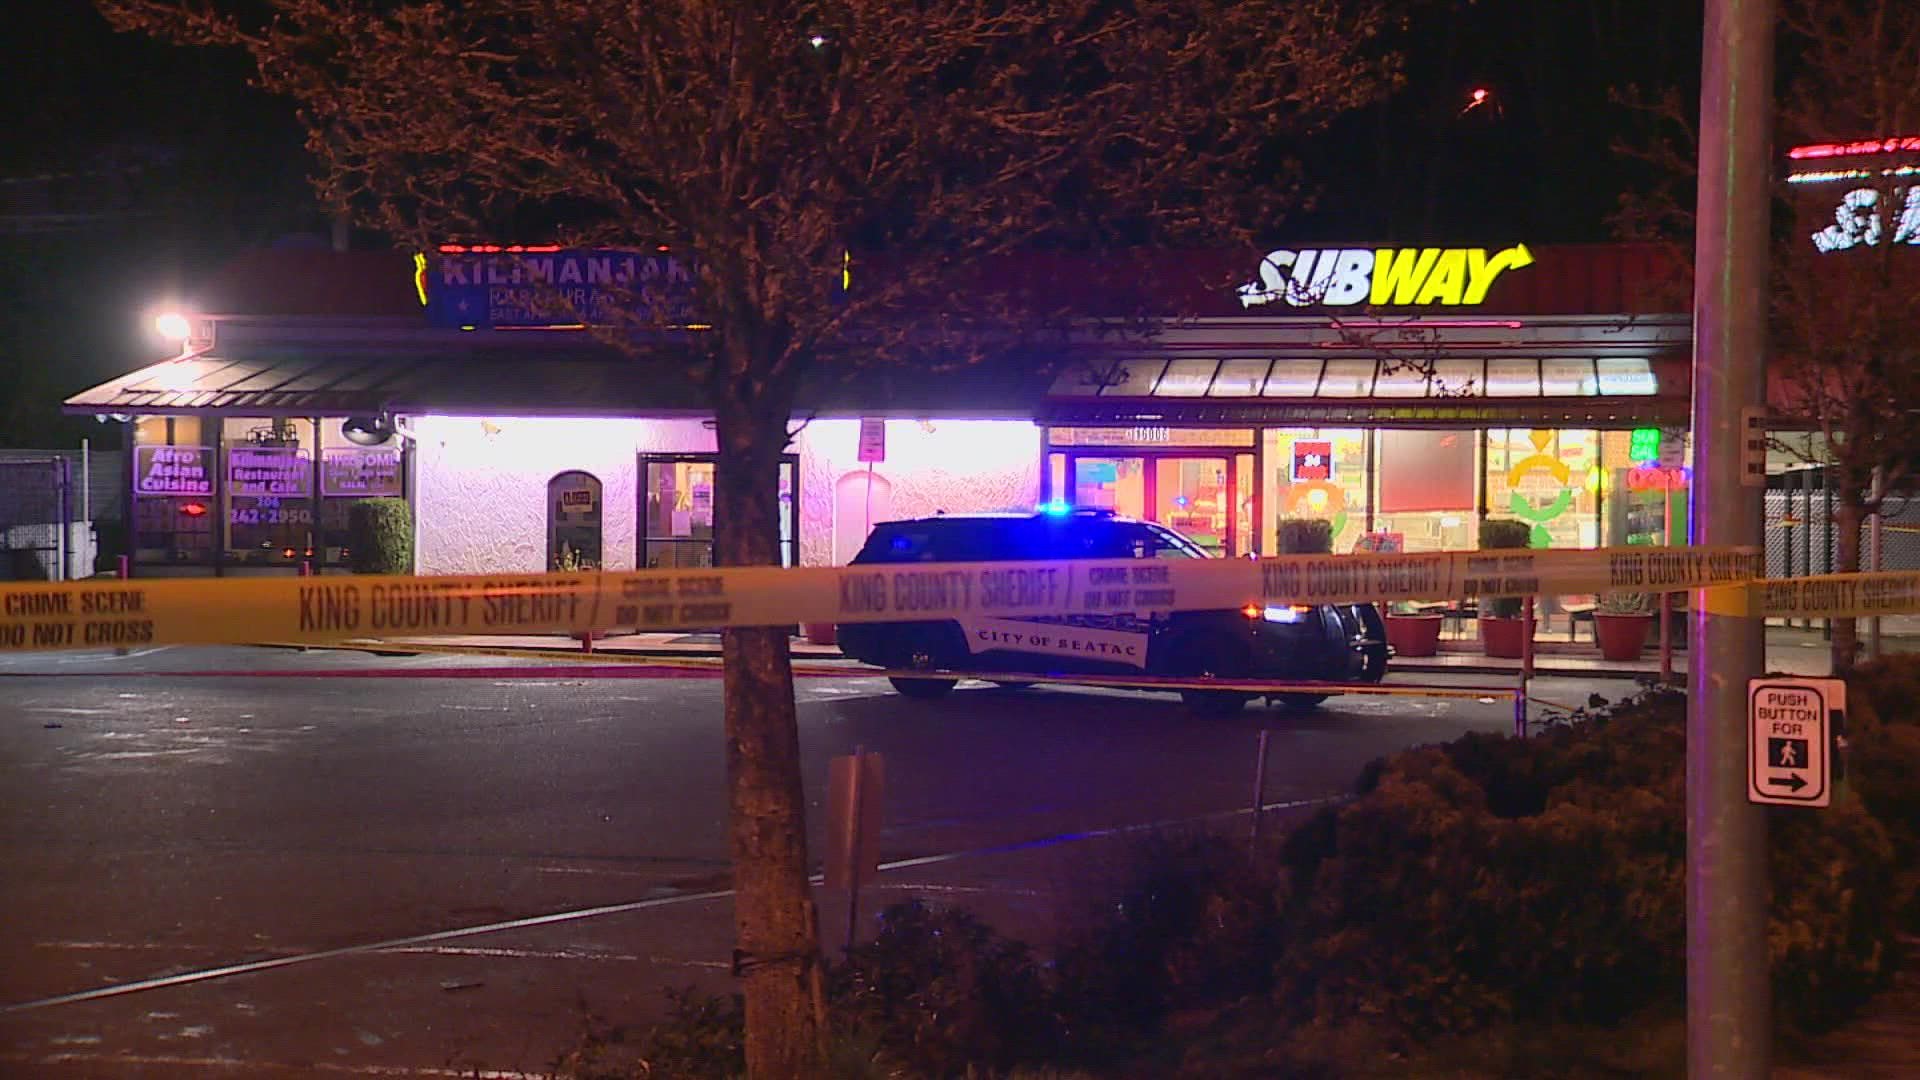 King County sheriff's deputies are investigating a shooting in Sea-Tac that sent one man to the hospital overnight Friday.